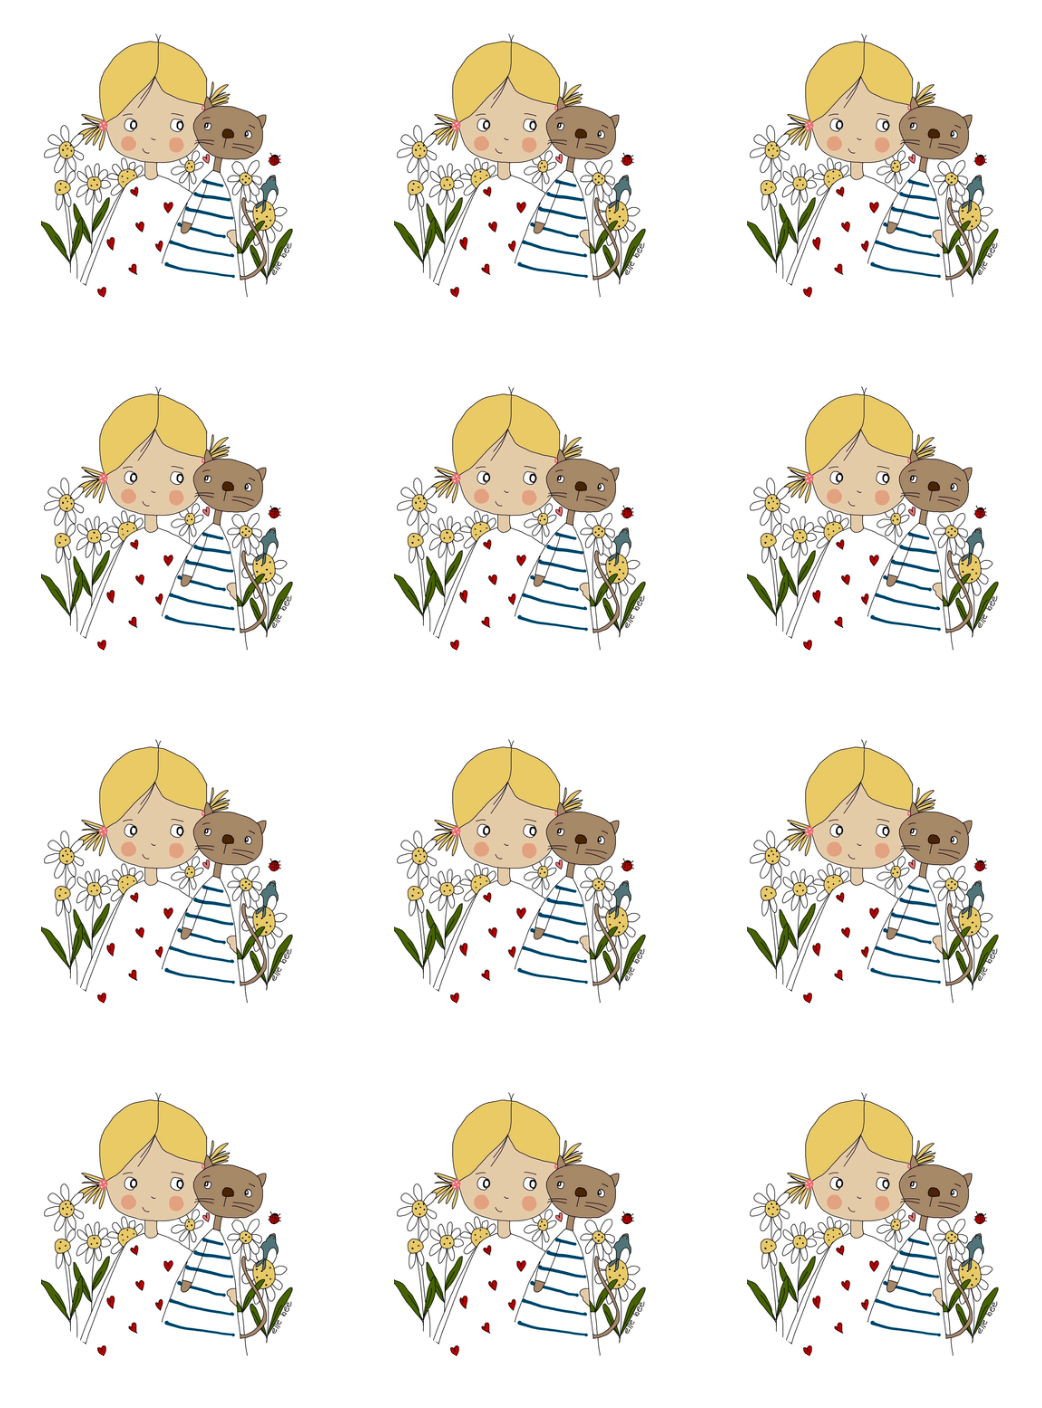 Kitty and Me round sticker pack of 12